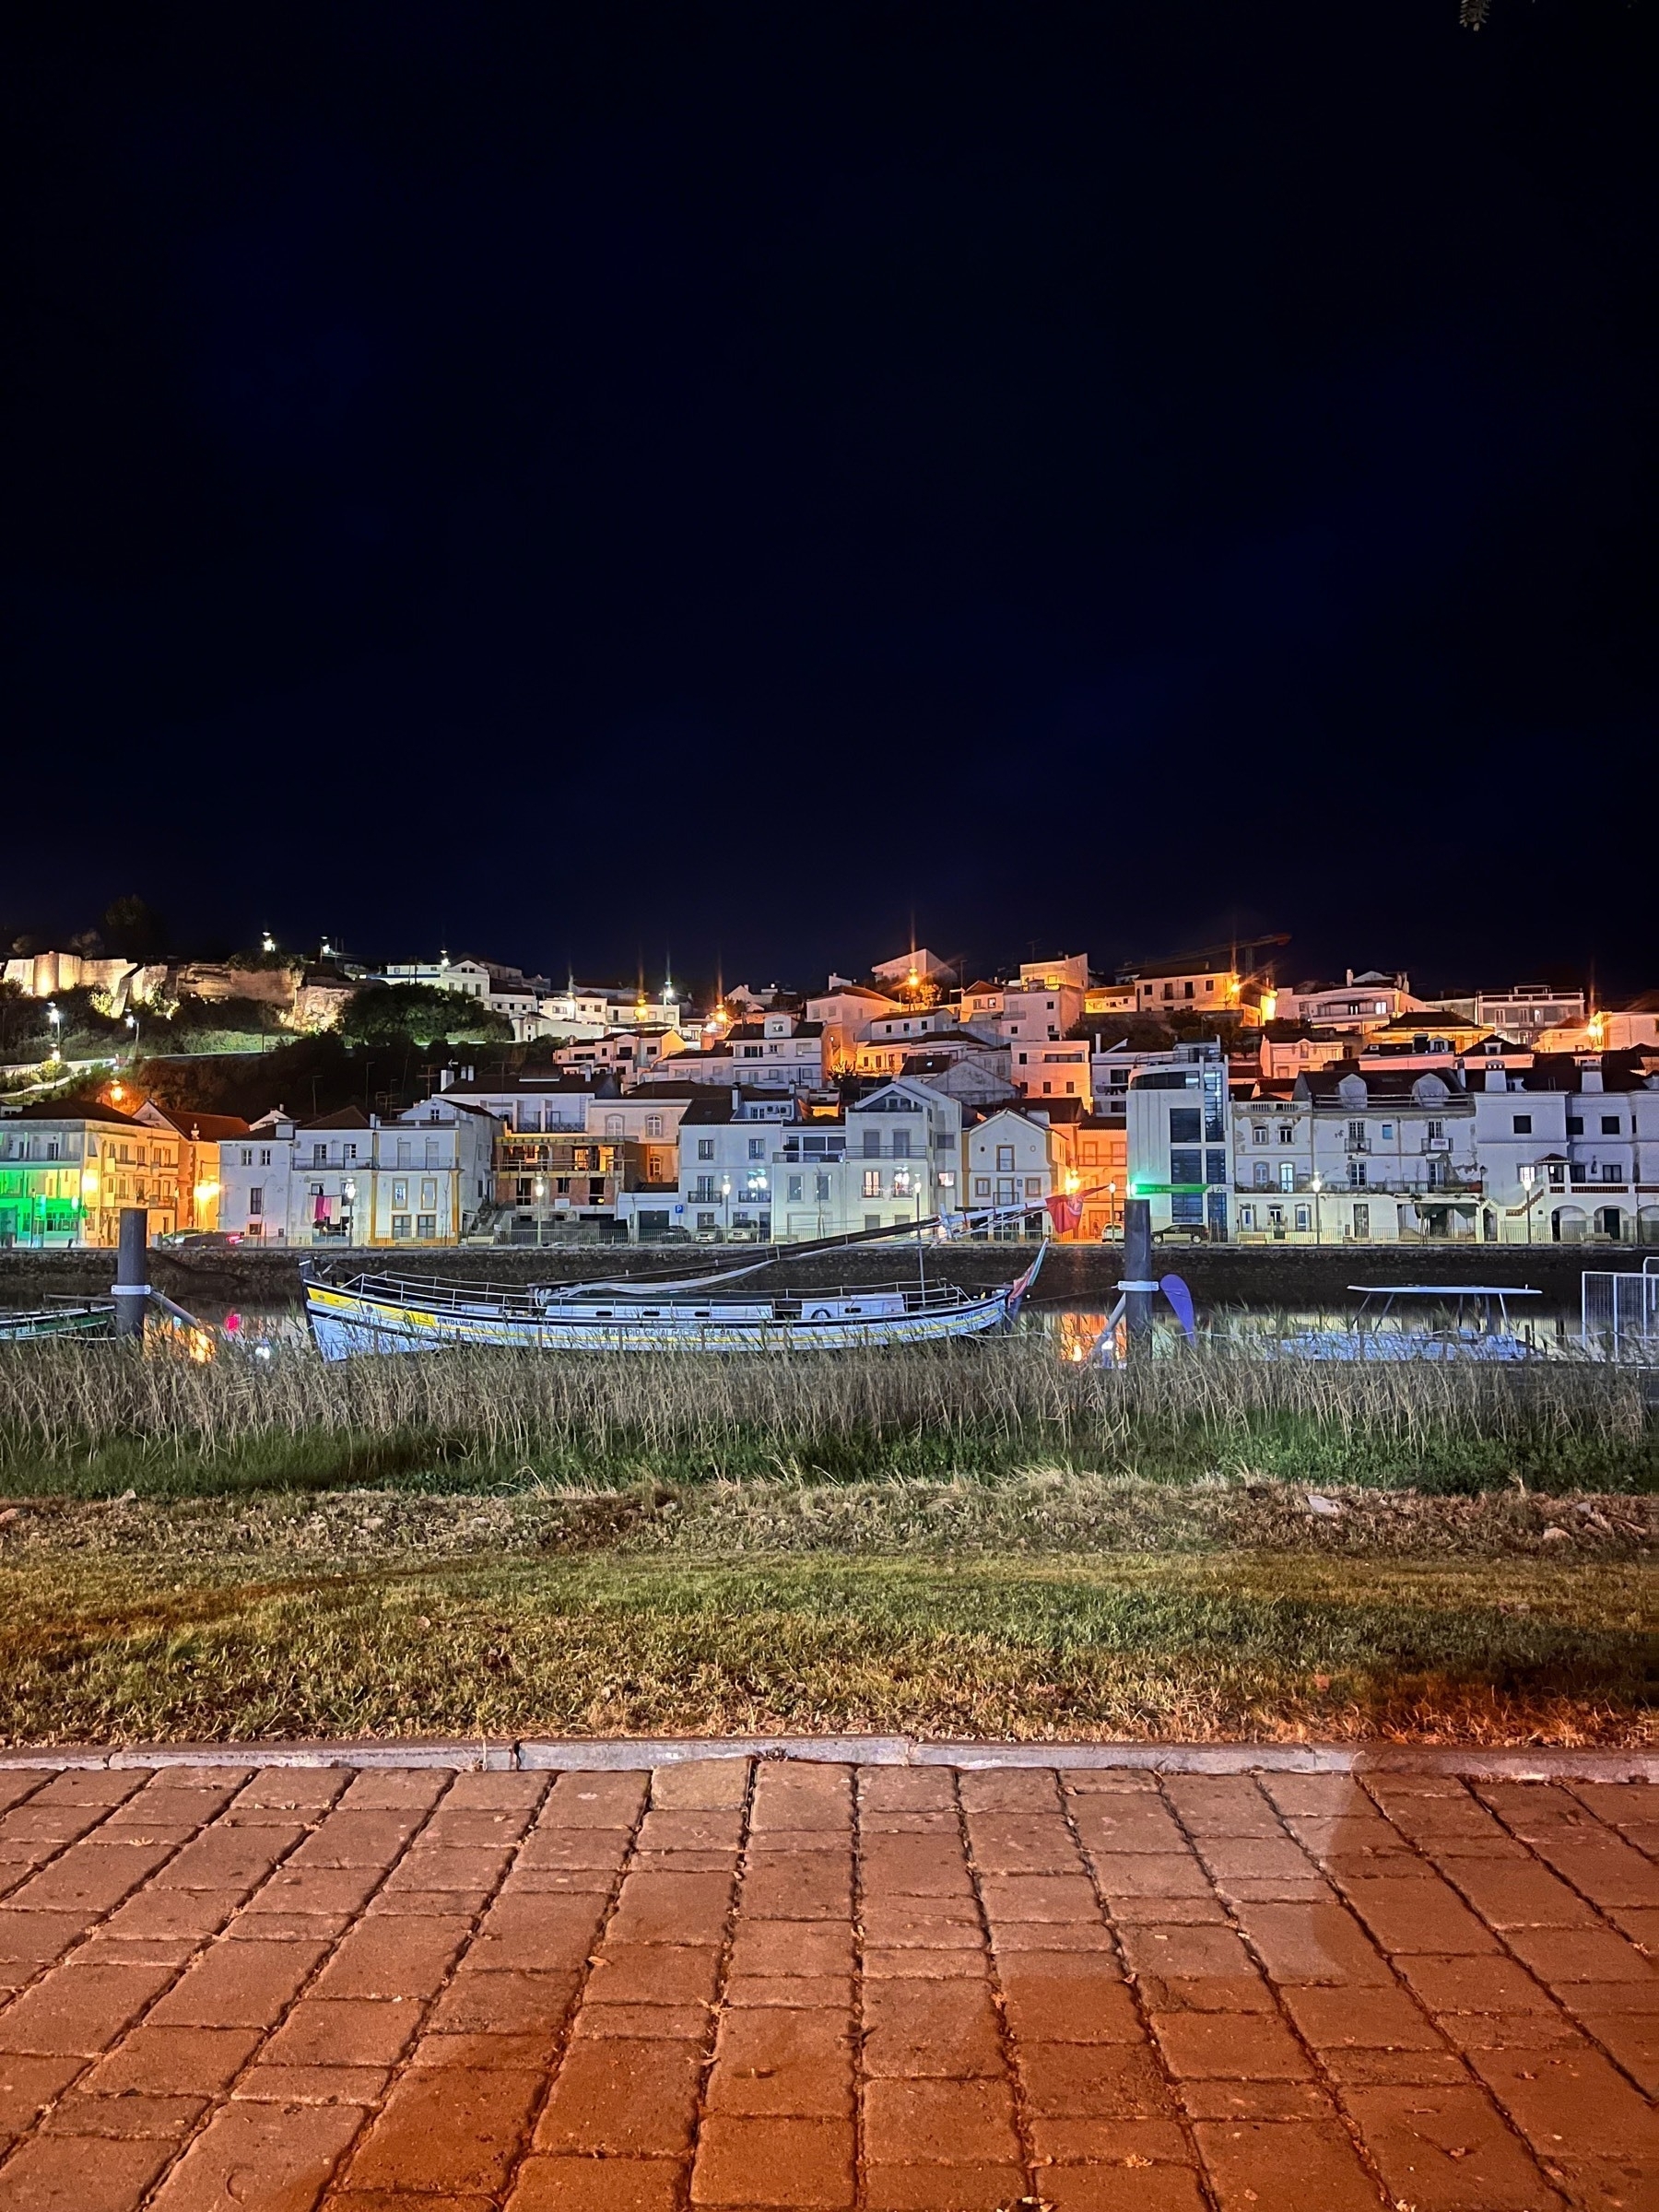 Alcacer do Sal at night, taken from the far bank of the River Sado, with a boat in the foreground